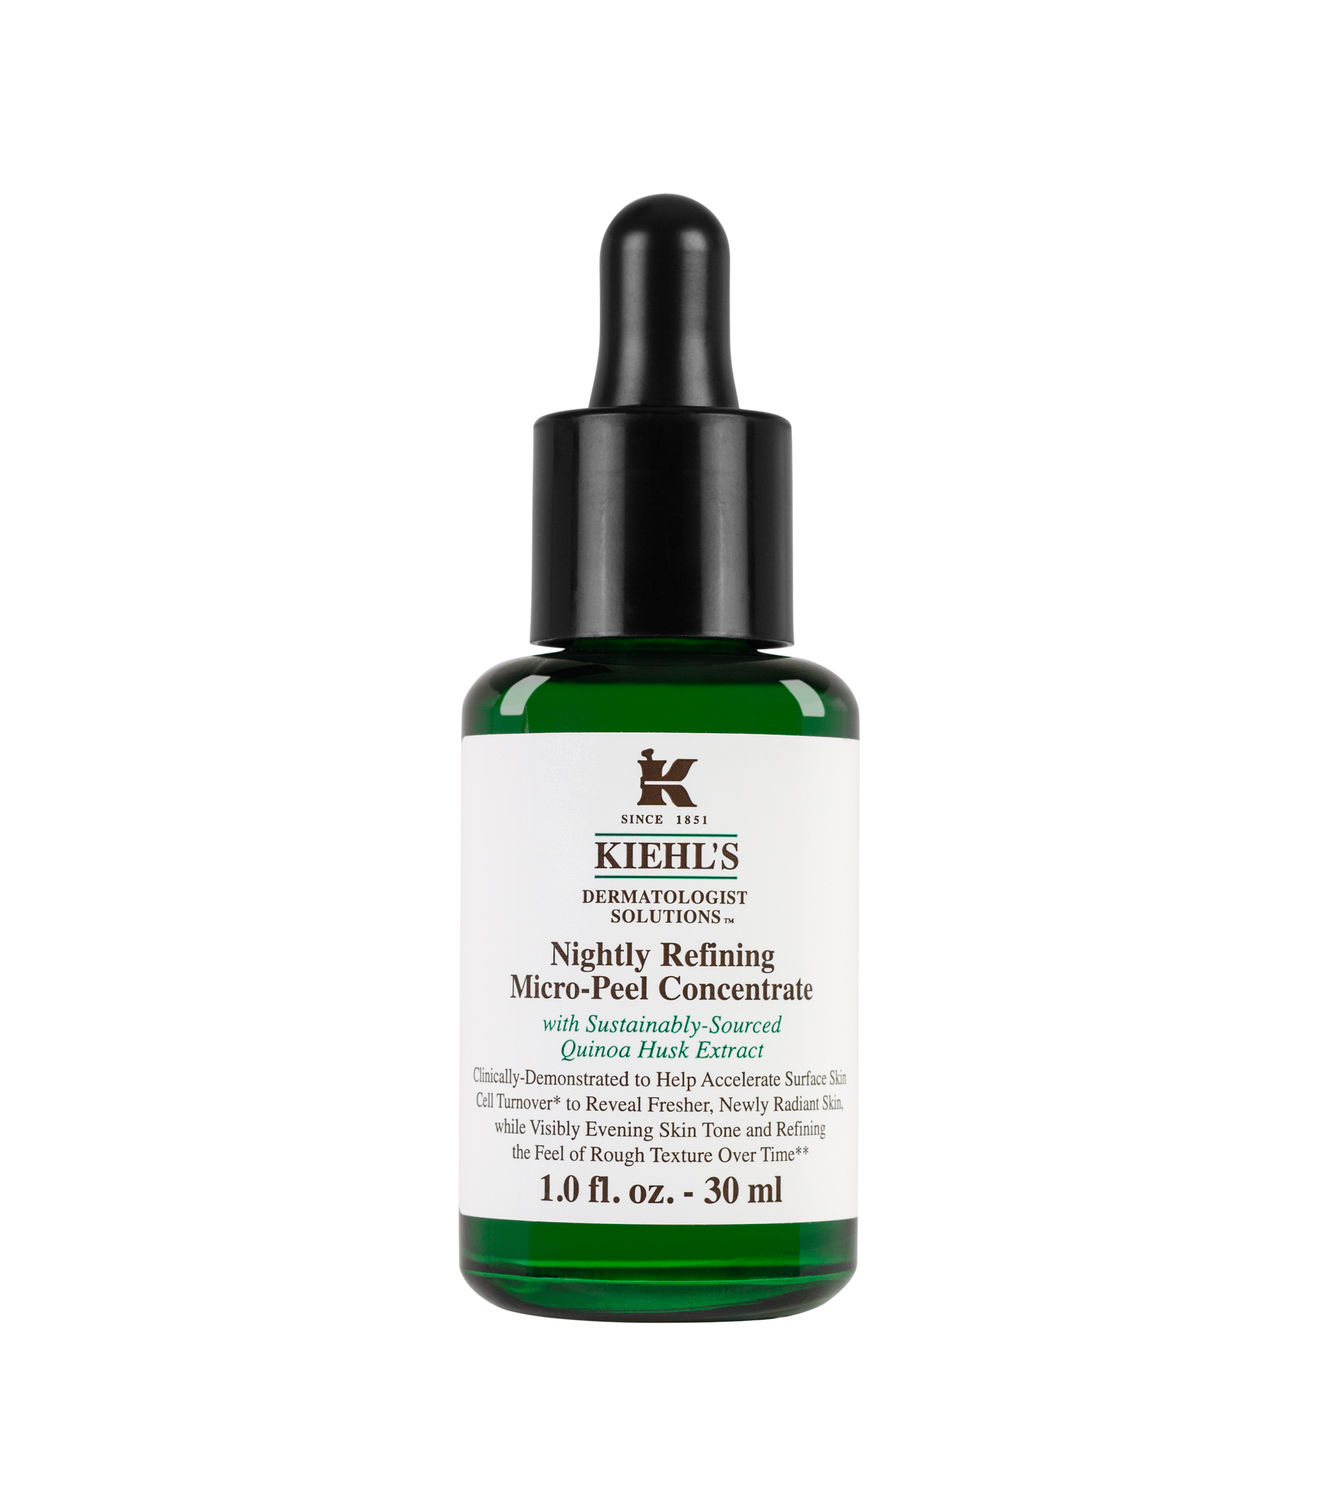 Nightly Refining Micro-Peel Concentrate_30ml_Bottle